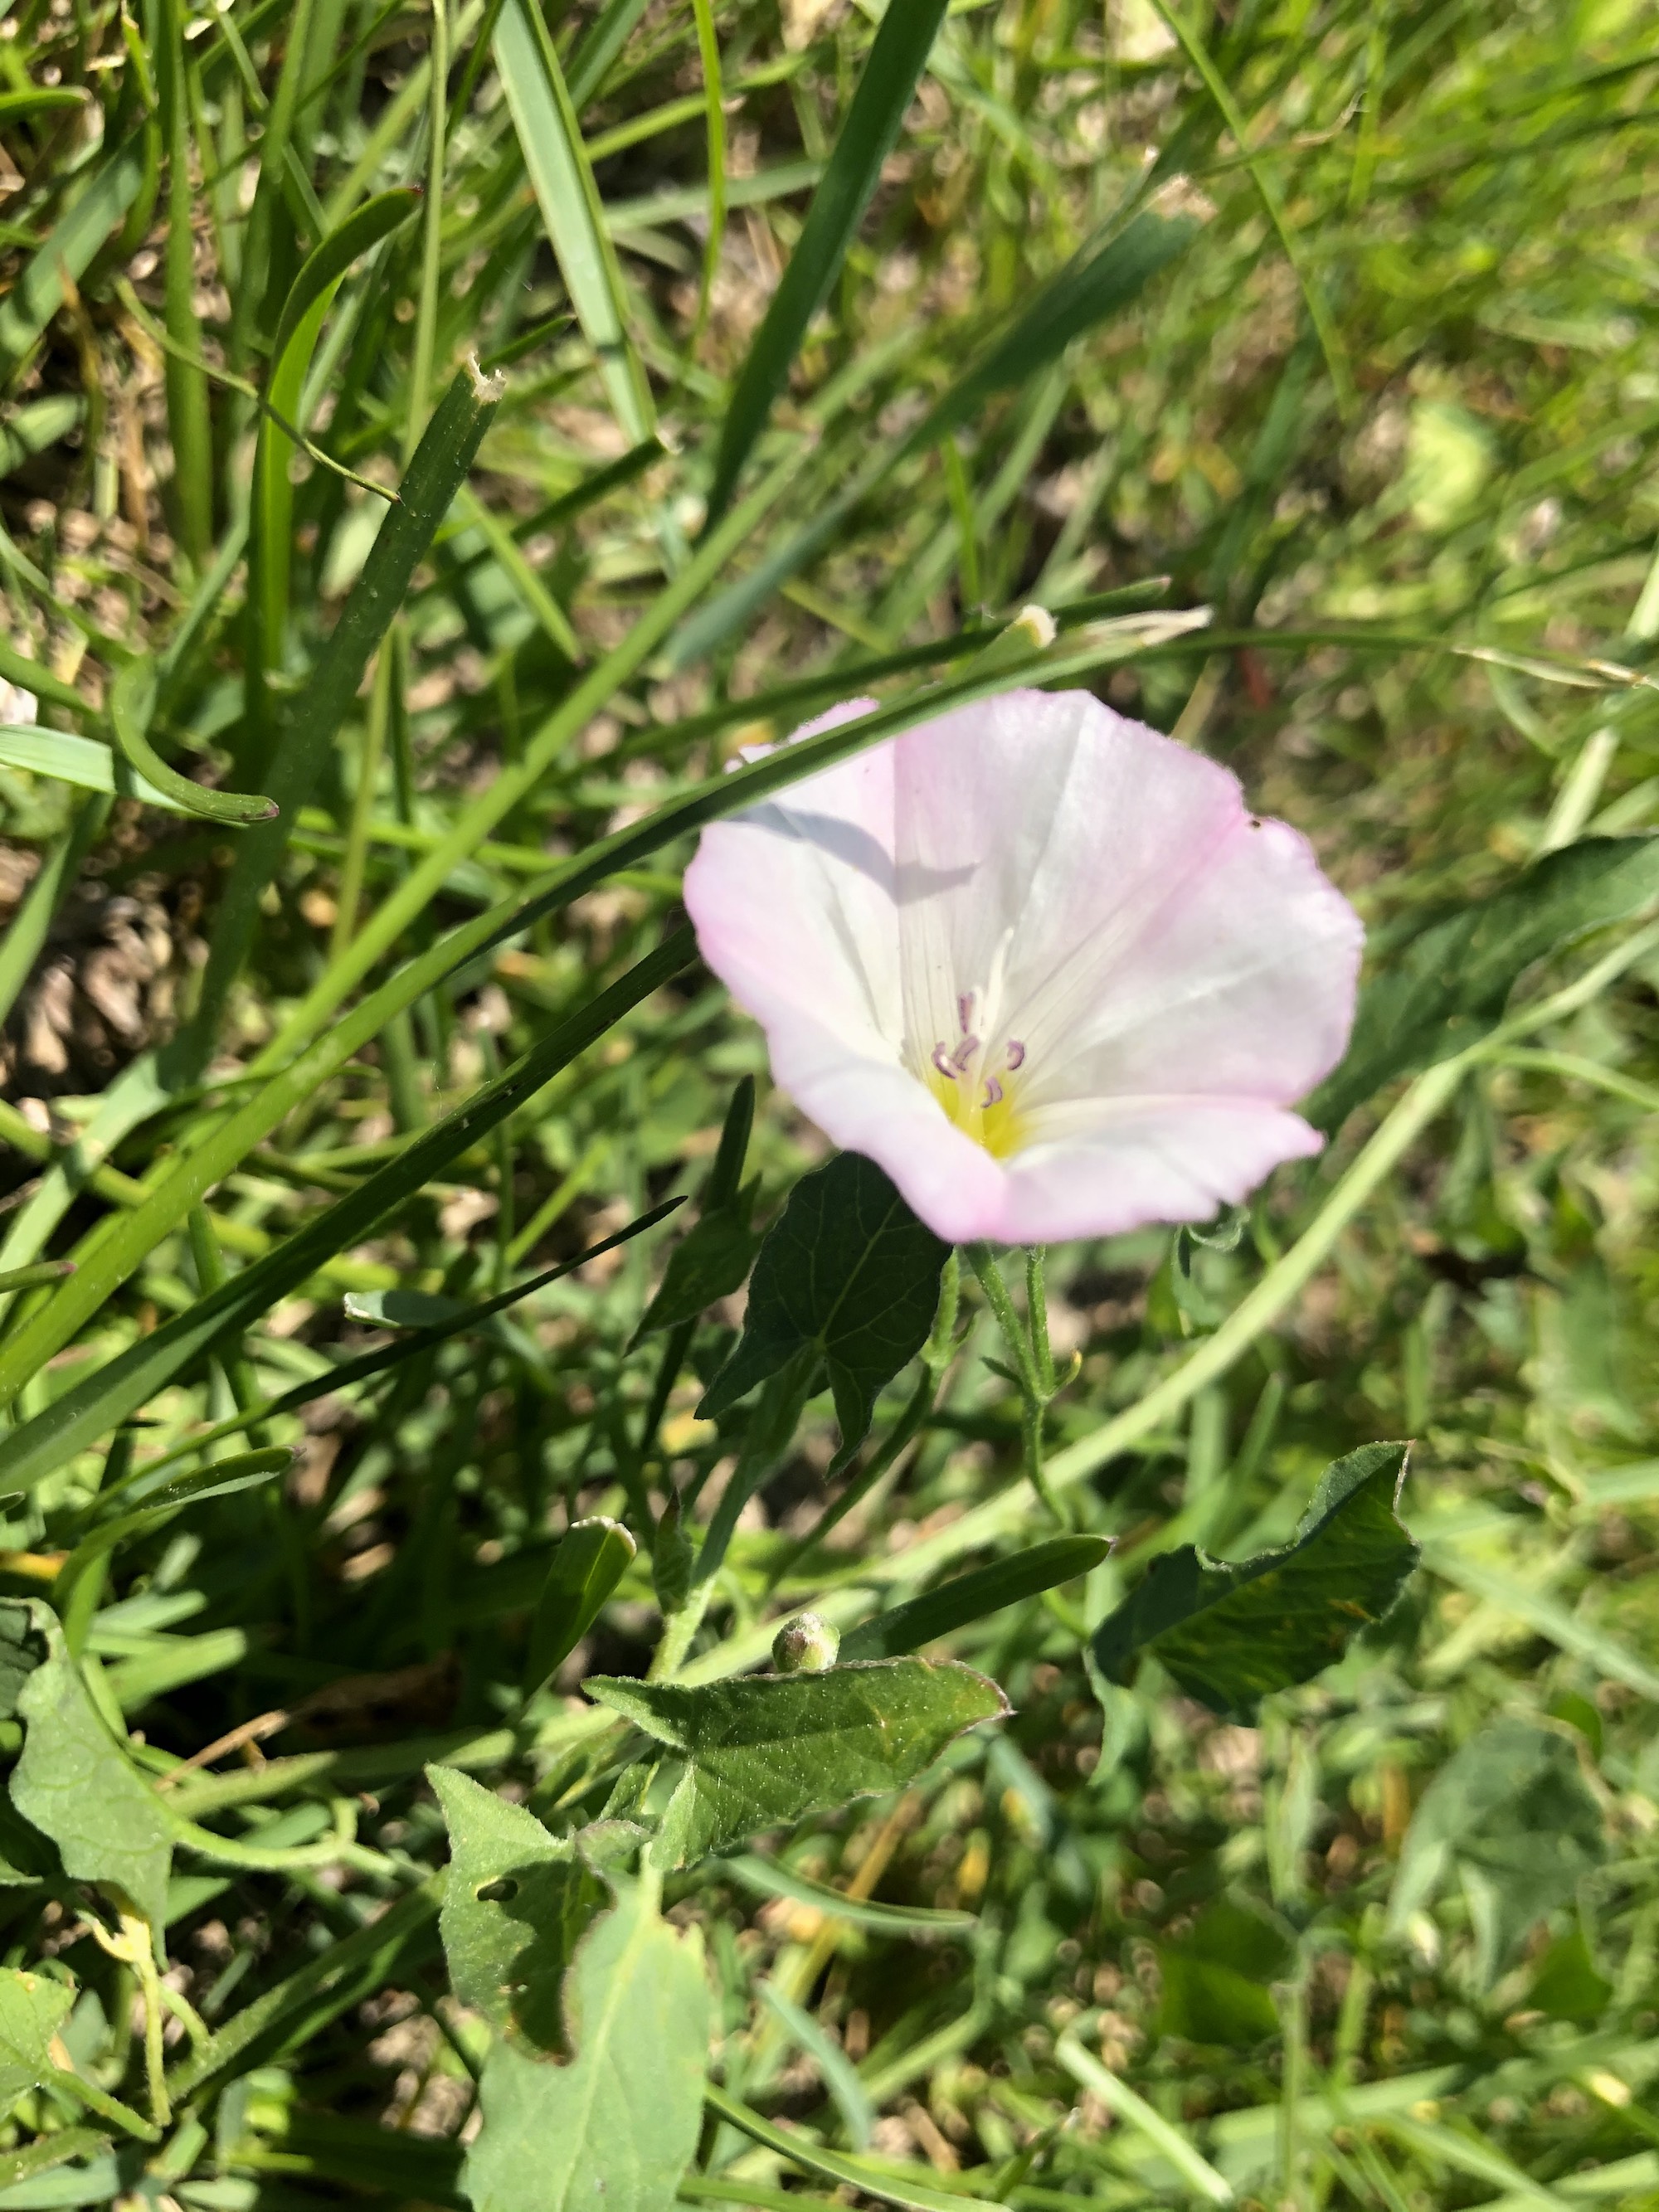 Field Bindweed by UW Arbortetum service road by Visitors Center in Madison, Wisconsin on June 3, 2021.